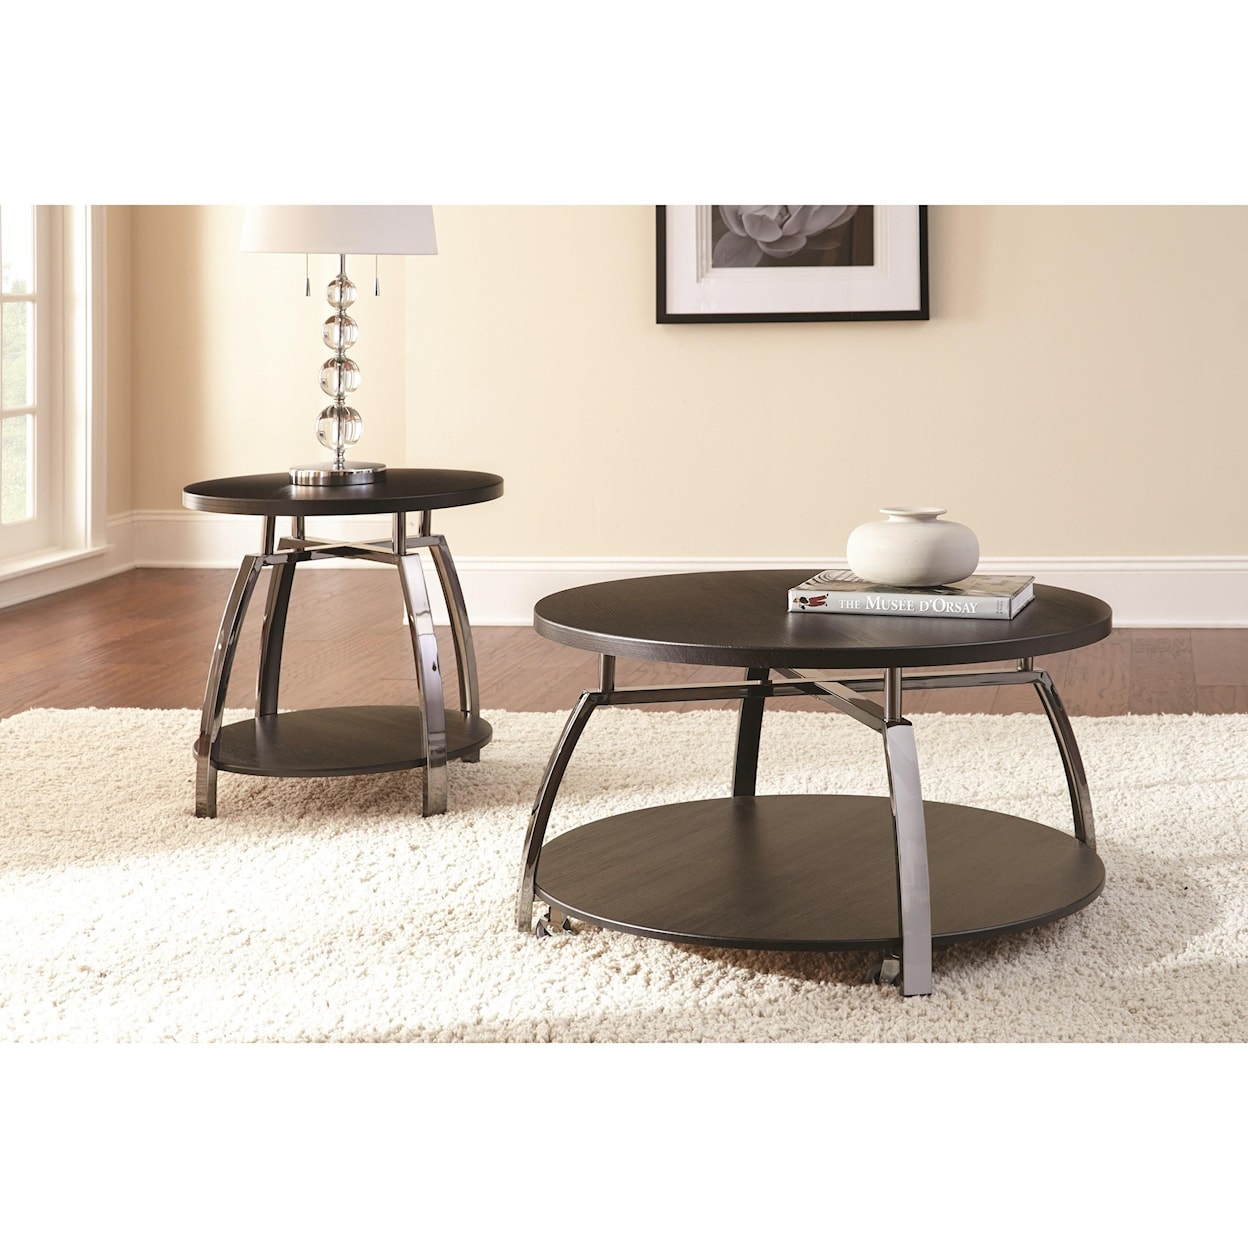 Steve Silver Coham COHAM COCKTAIL TABLE WITH CASTER |